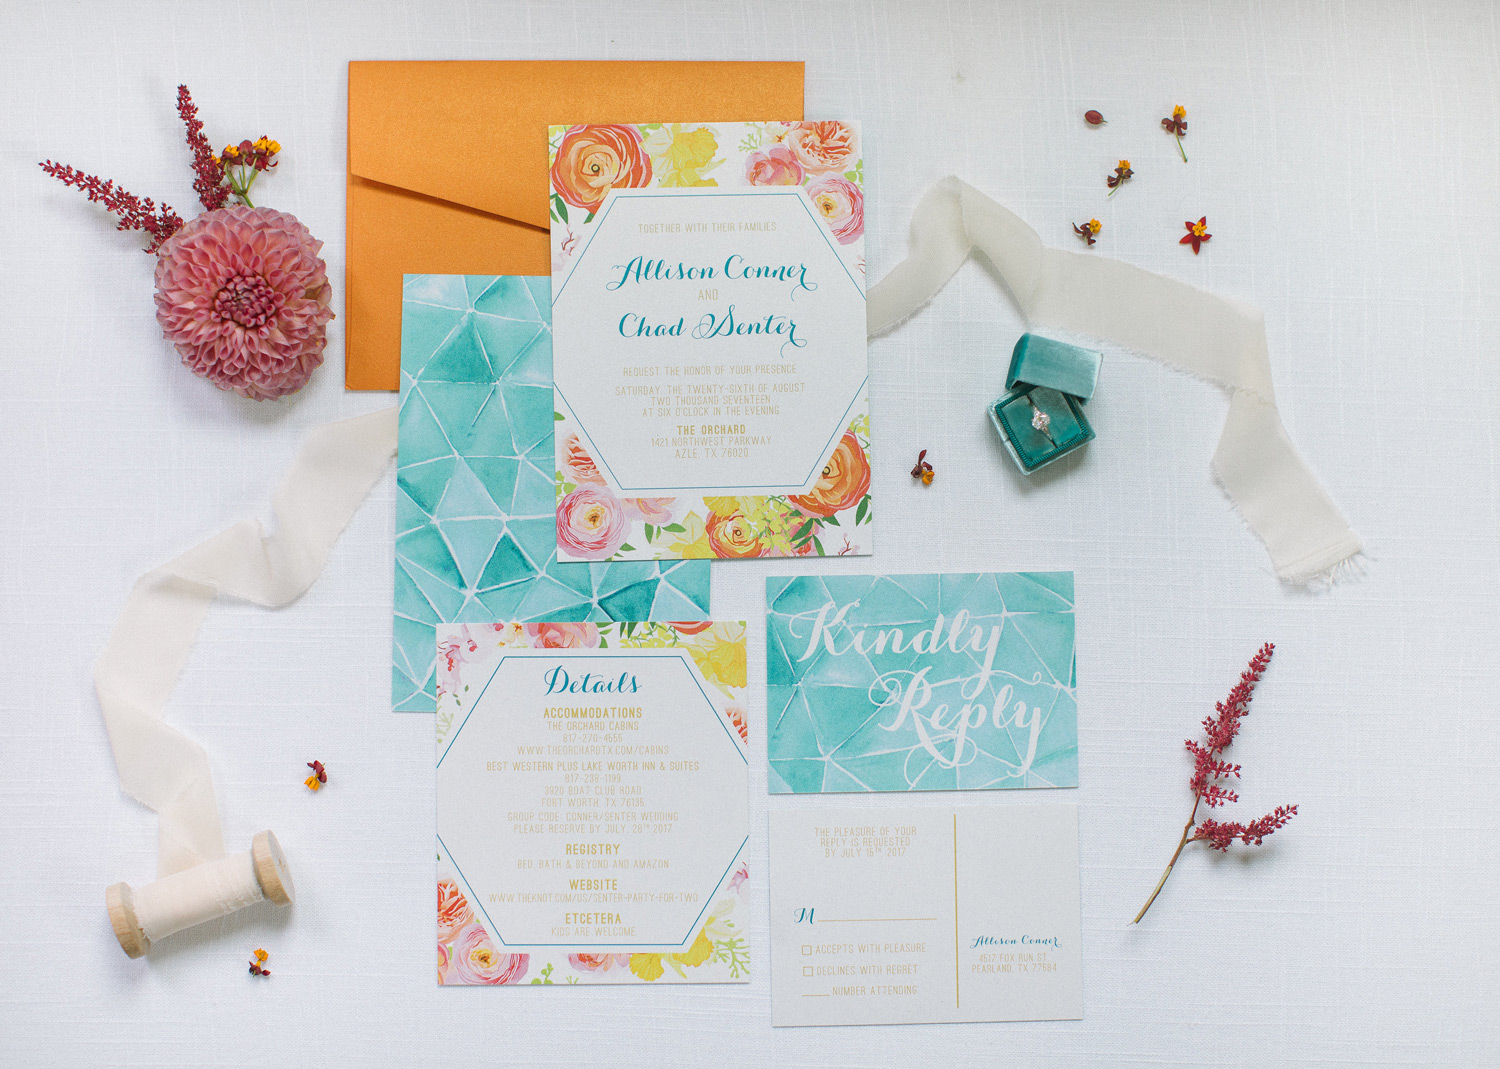 Colorful teal and orange wedding invitation with geometric shapes